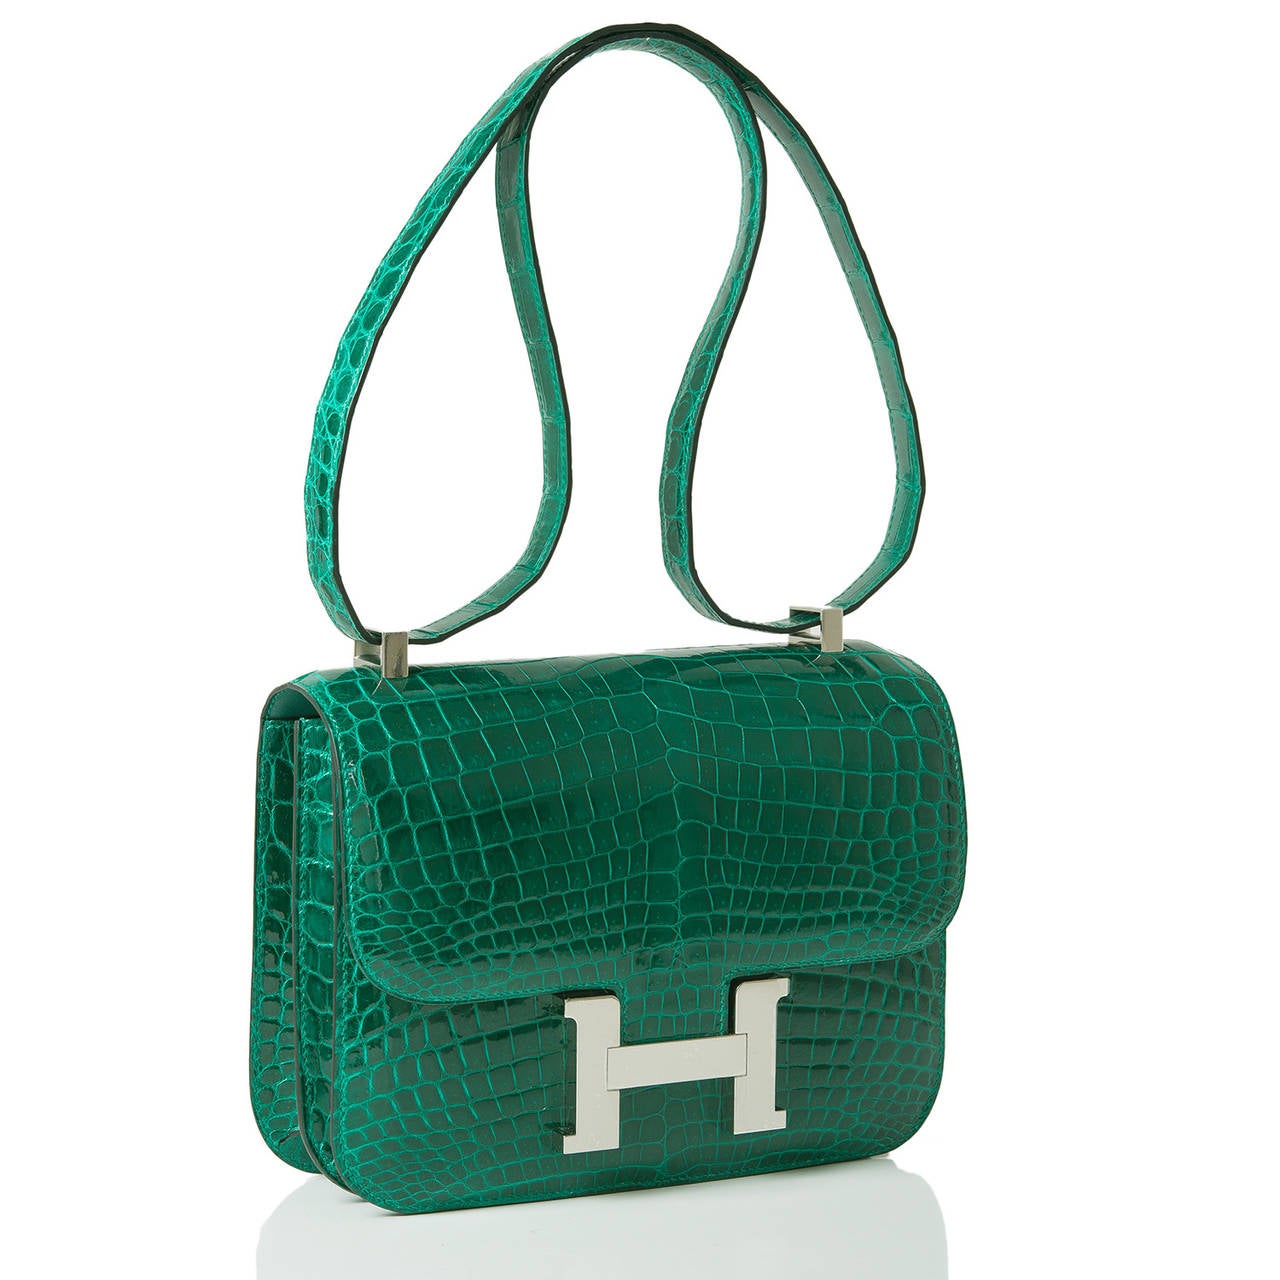 Hermes Emerald niloticus crocodile Constance 24cm with palladium hardware.

This classic Hermes style features tonal stitching, palladium hardware, metal 